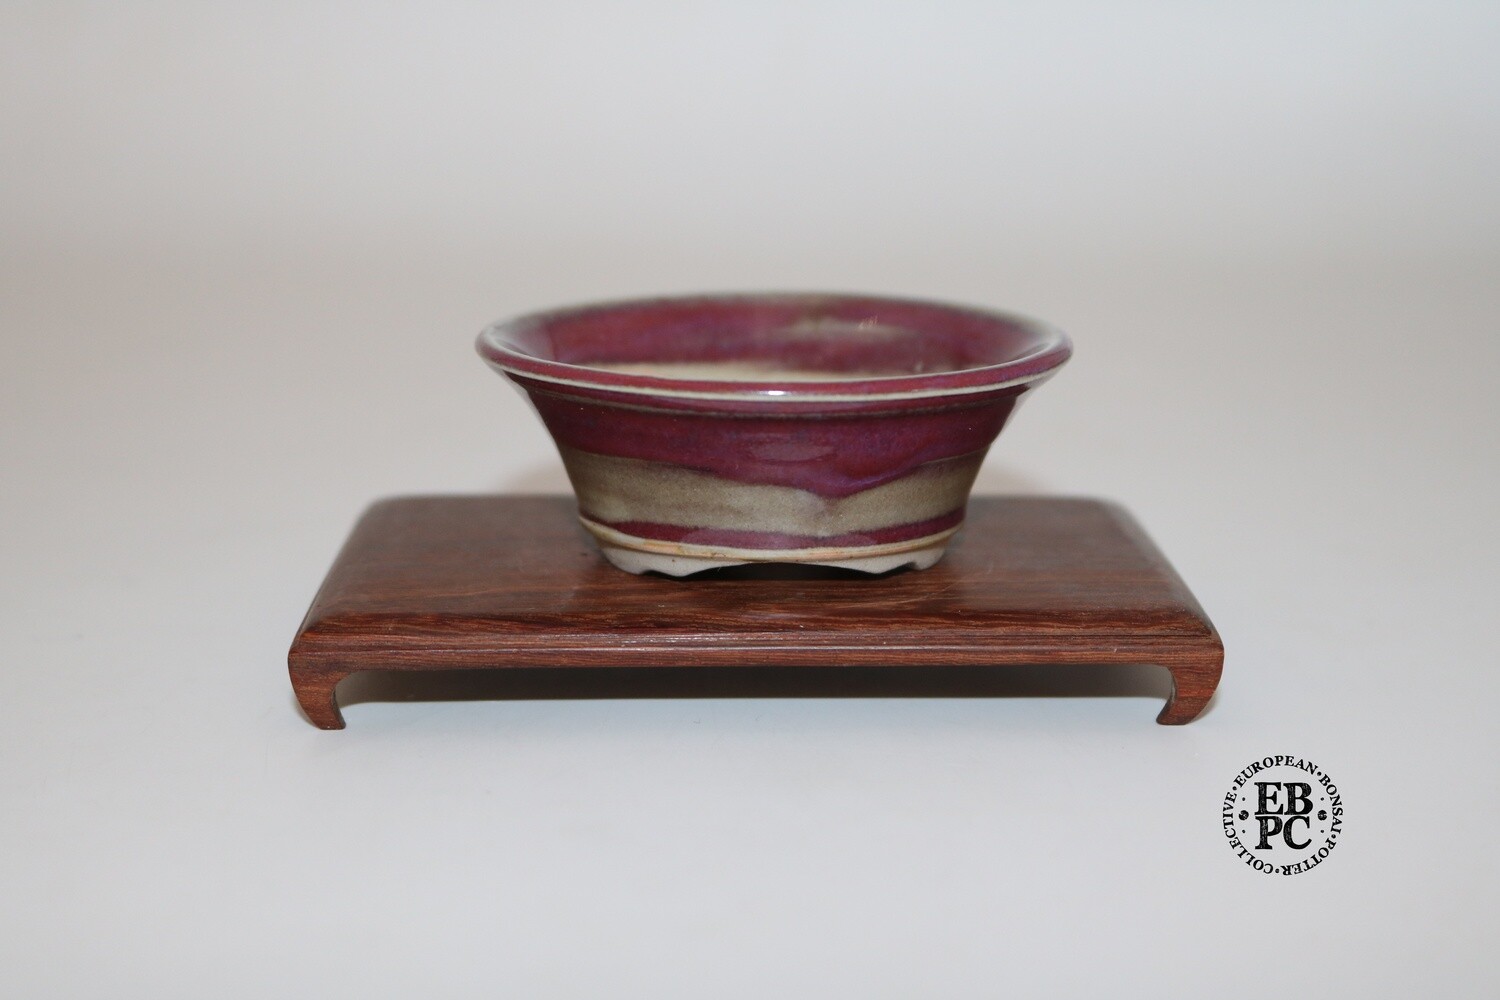 PAS Pots - 7.3cm; Magenta; Round; Mame / Accent pot; Hand Thrown; Superb Glaze; Detailed foot ring; Patricia